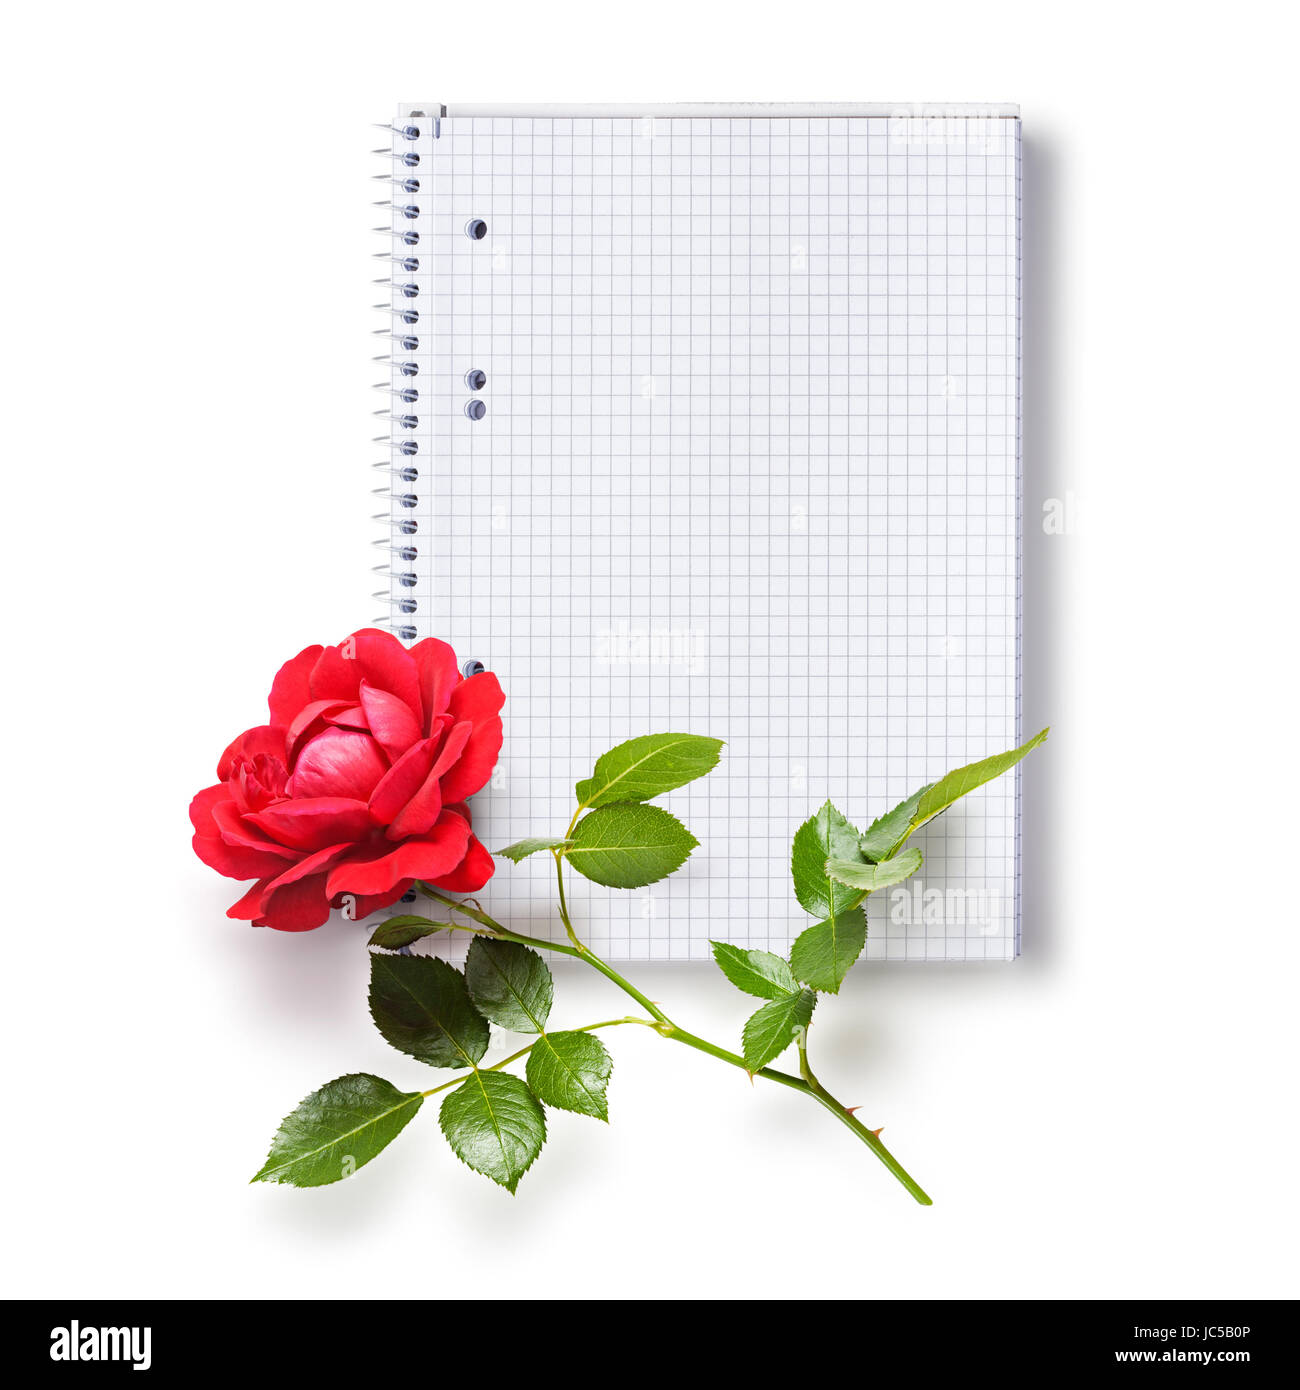 Paper spiral squared notebook and red rose flower isolated on white background Stock Photo